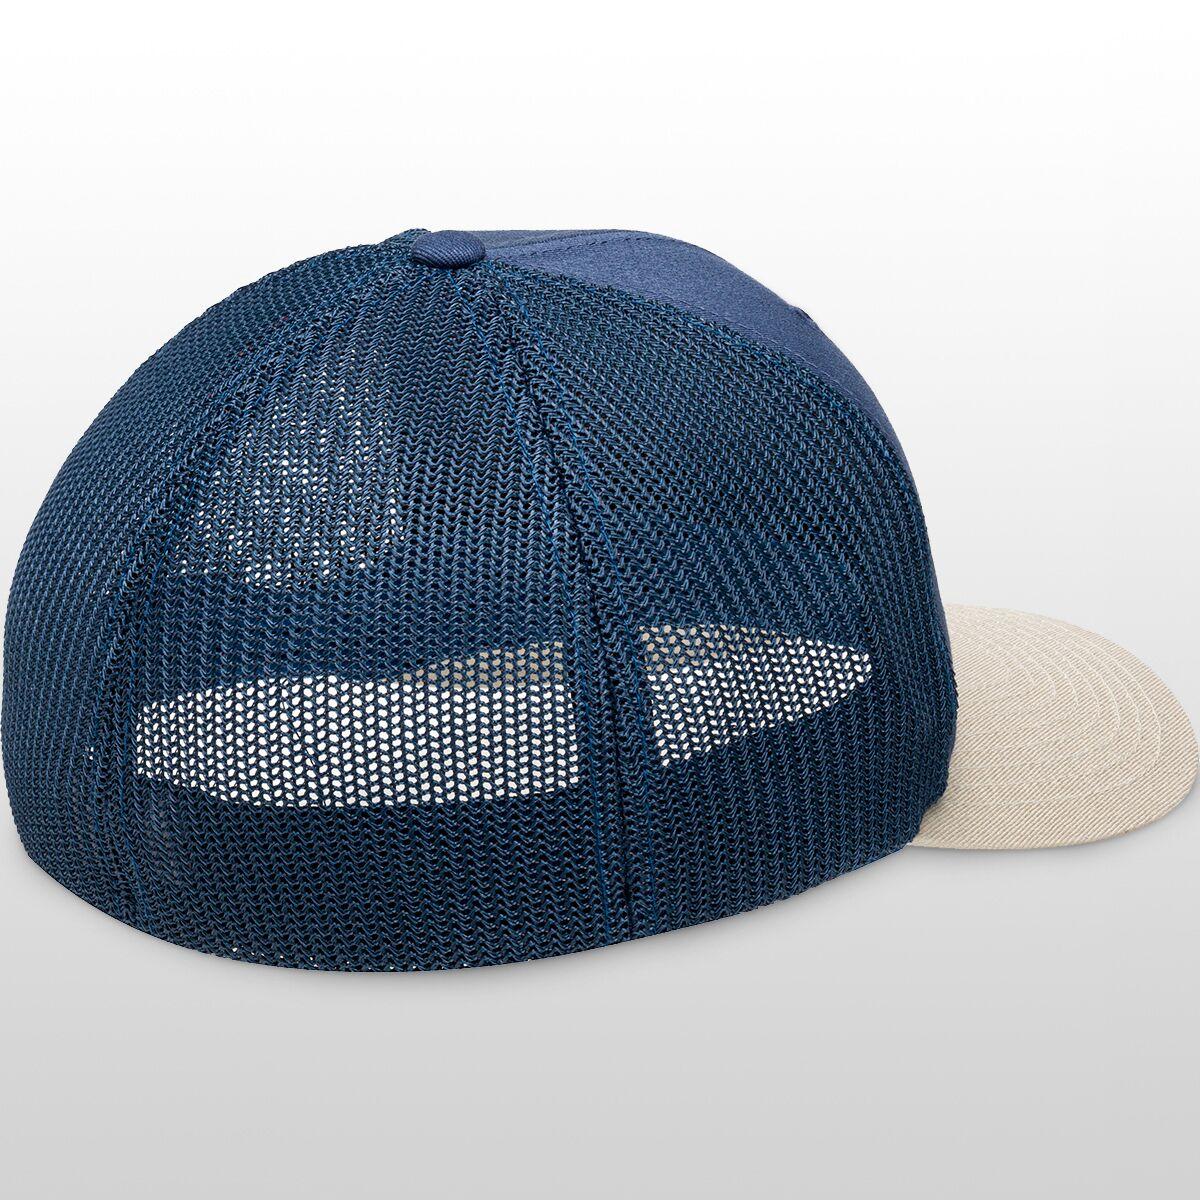 Columbia Rugged Outdoor Mesh Hat in Blue